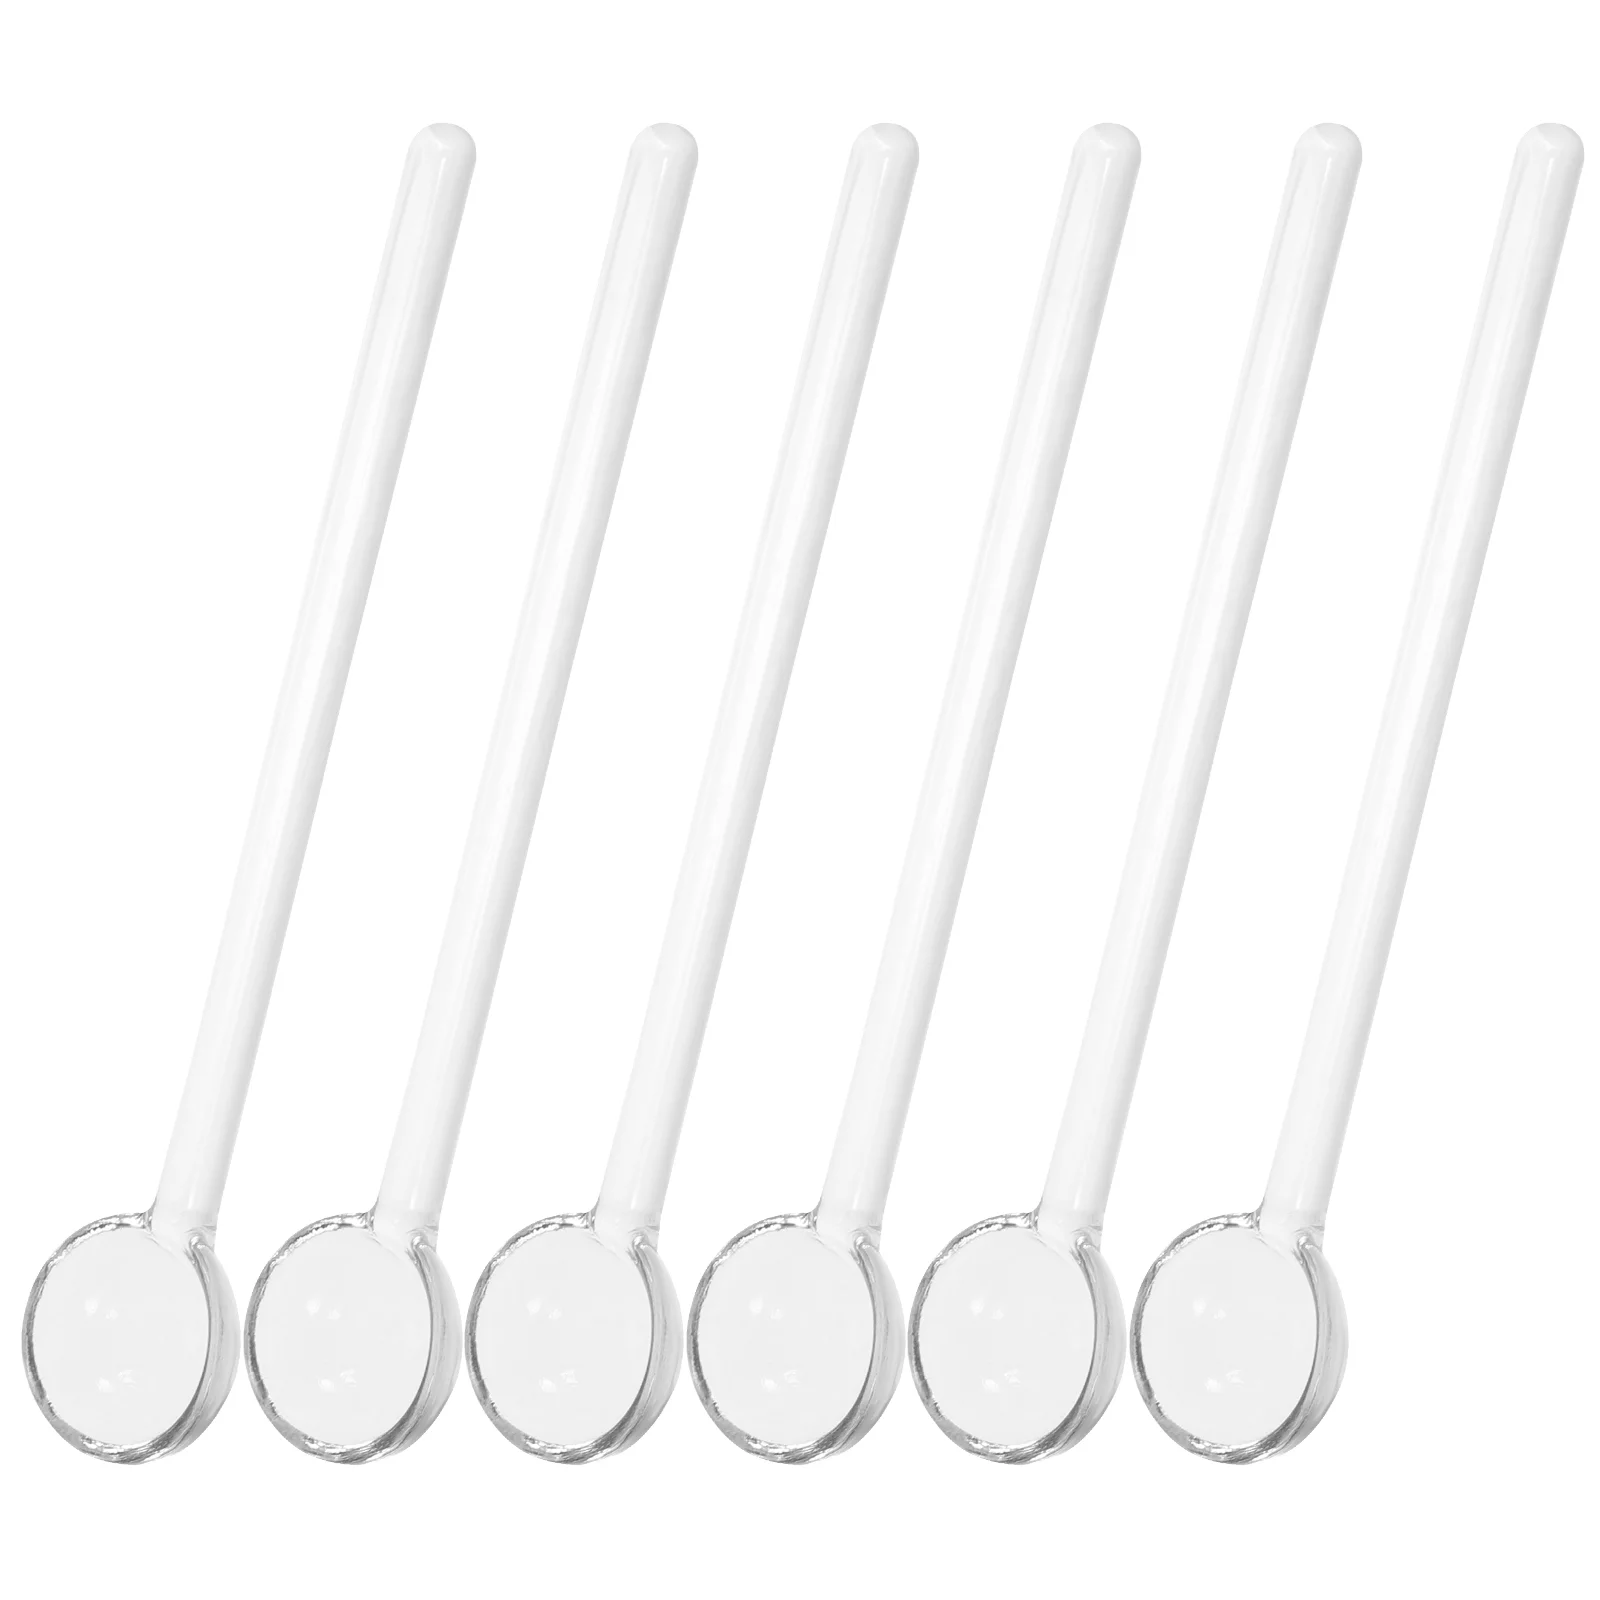 

Spoons Spoon Tea Stirring Coffee Stirrers Crystal Cocktail Clear Teaspoons Mixing Rods Ice Espresso Stirrer Cold Drink Stir